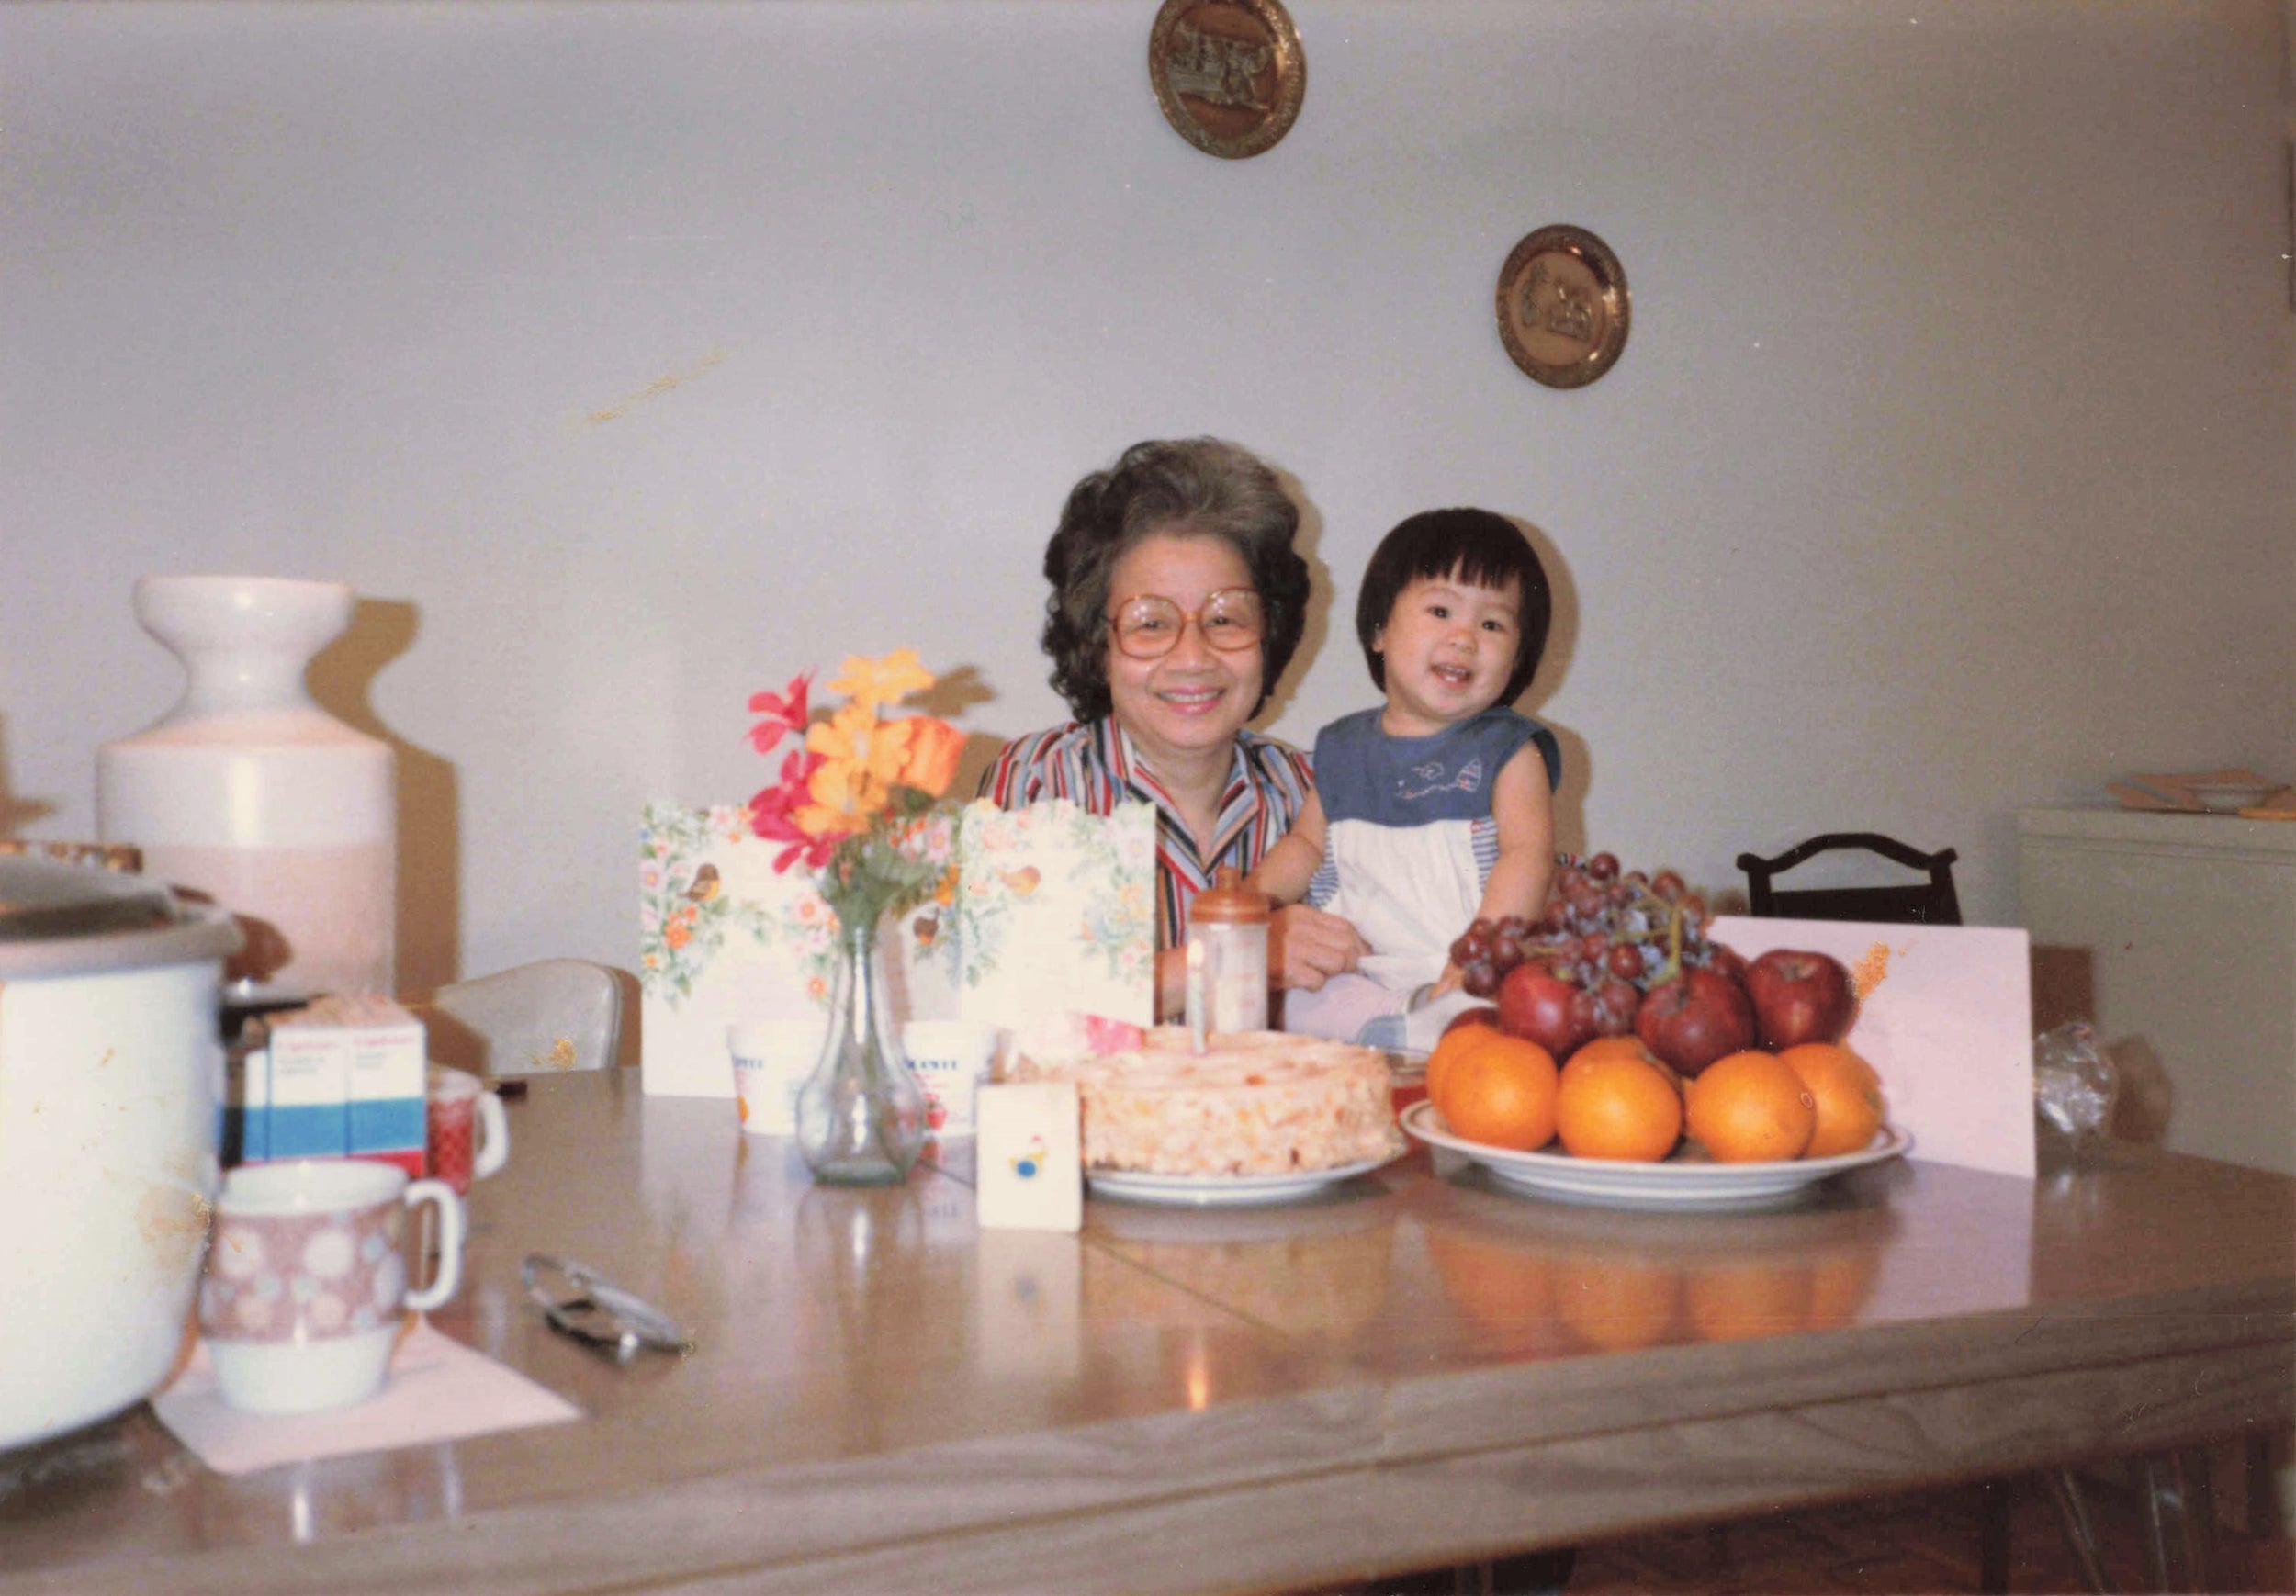 A childhood photo of Kat Lieu, the founder of the Subtle Asian Baking community and cookbook author of Modern Asian Baking At Home, with their grandmother at a dining table.